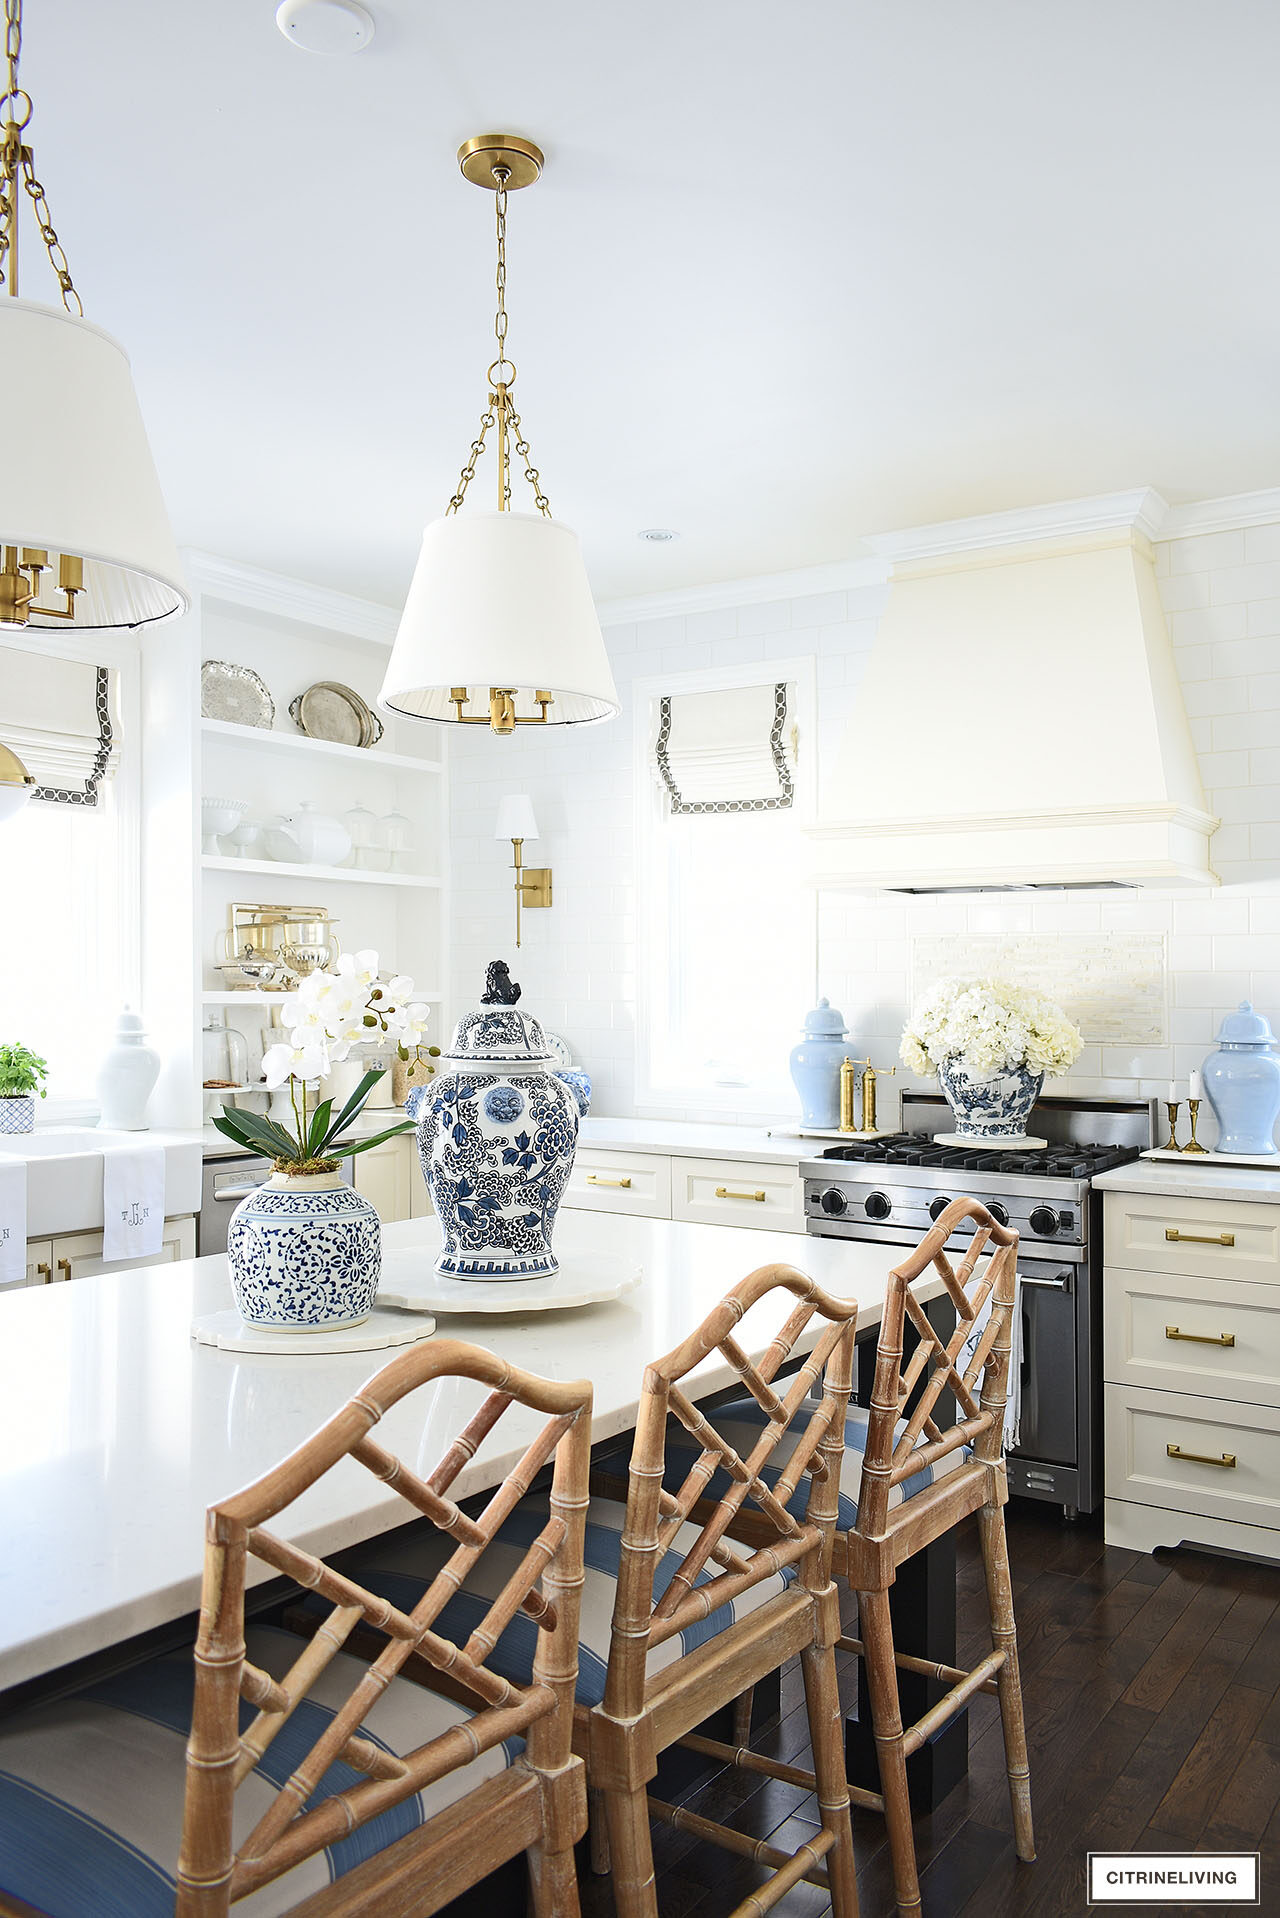 Kitchen decorated for spring with simple touches in blue and white, orchids, hydrangeas and ginger jars.